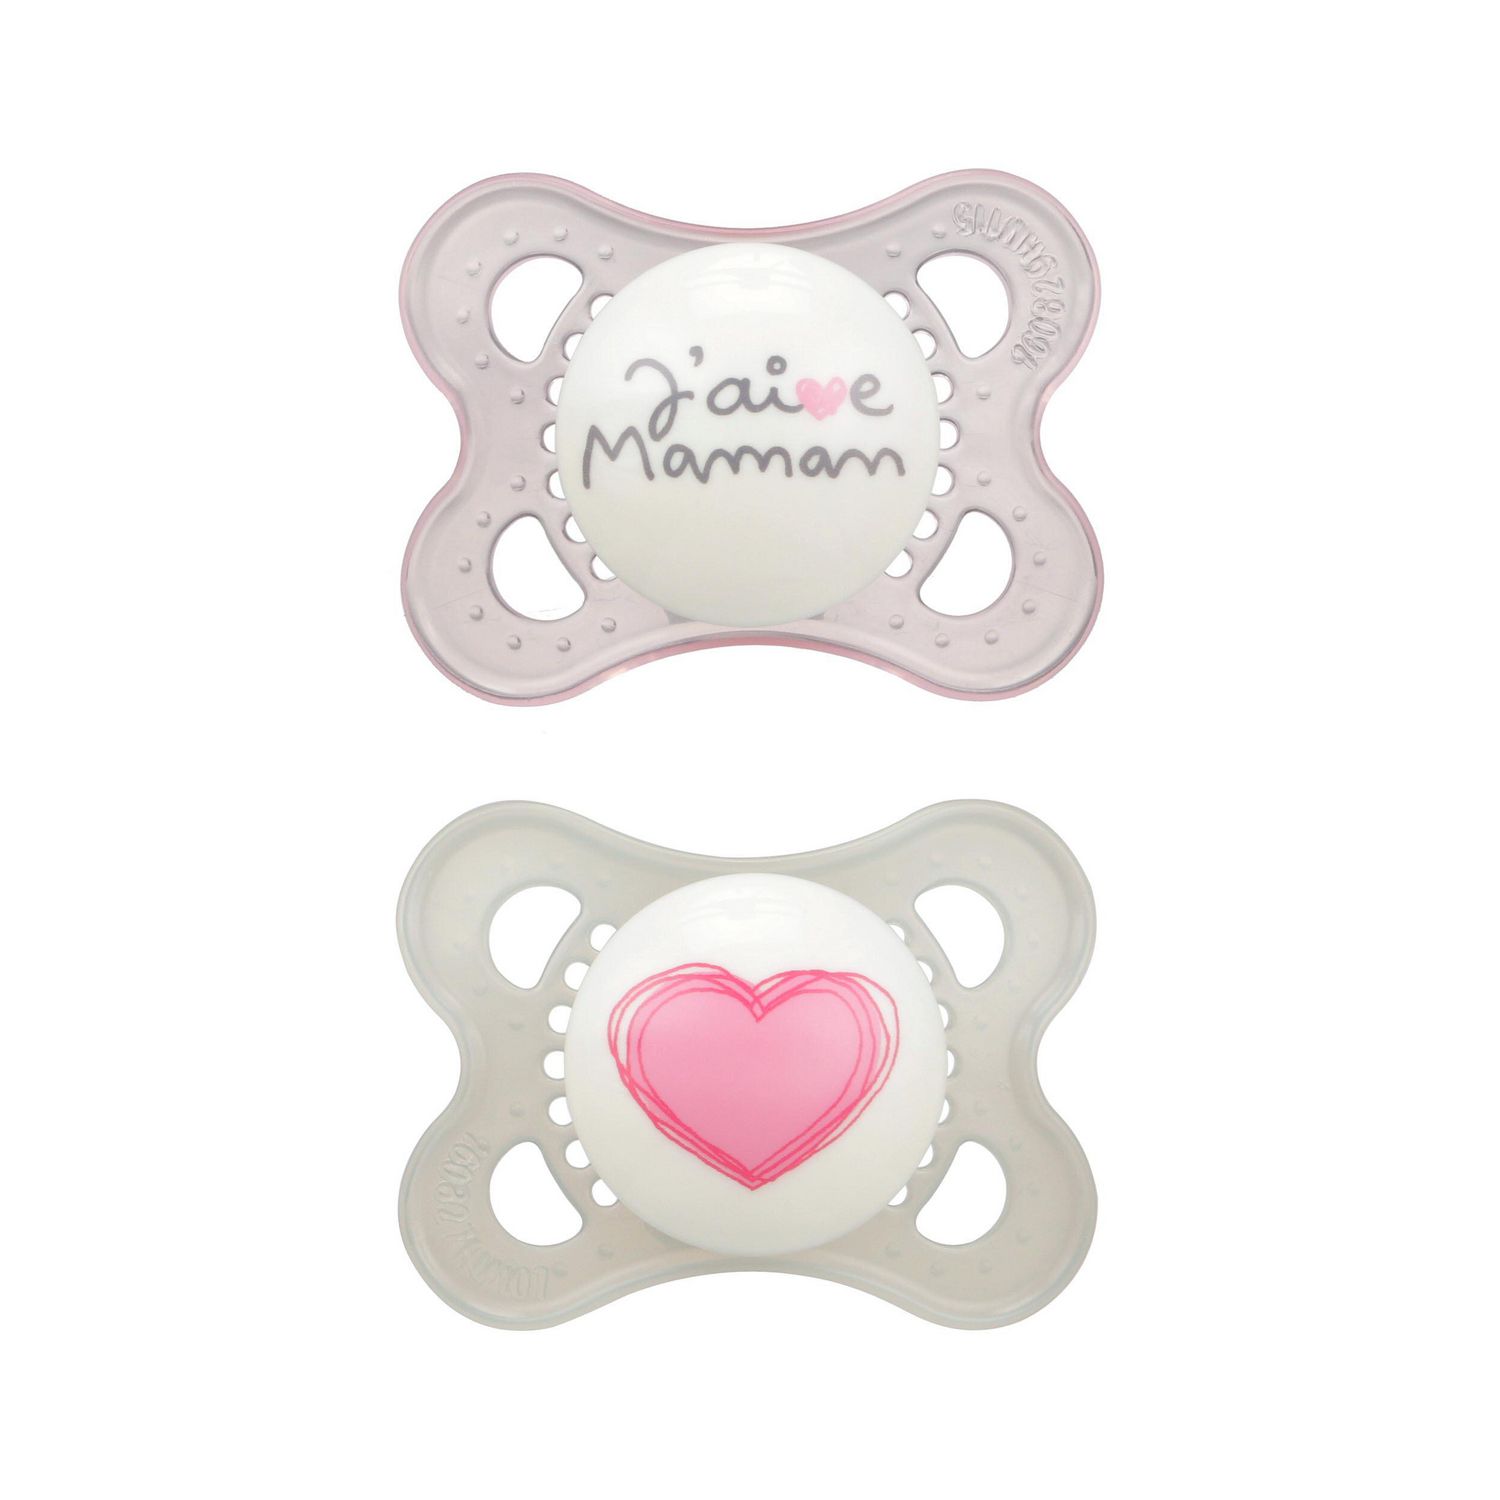 Mam J Aime Maman Collection Pacifiers 2 Pack 1 Sterilizing Pacifier